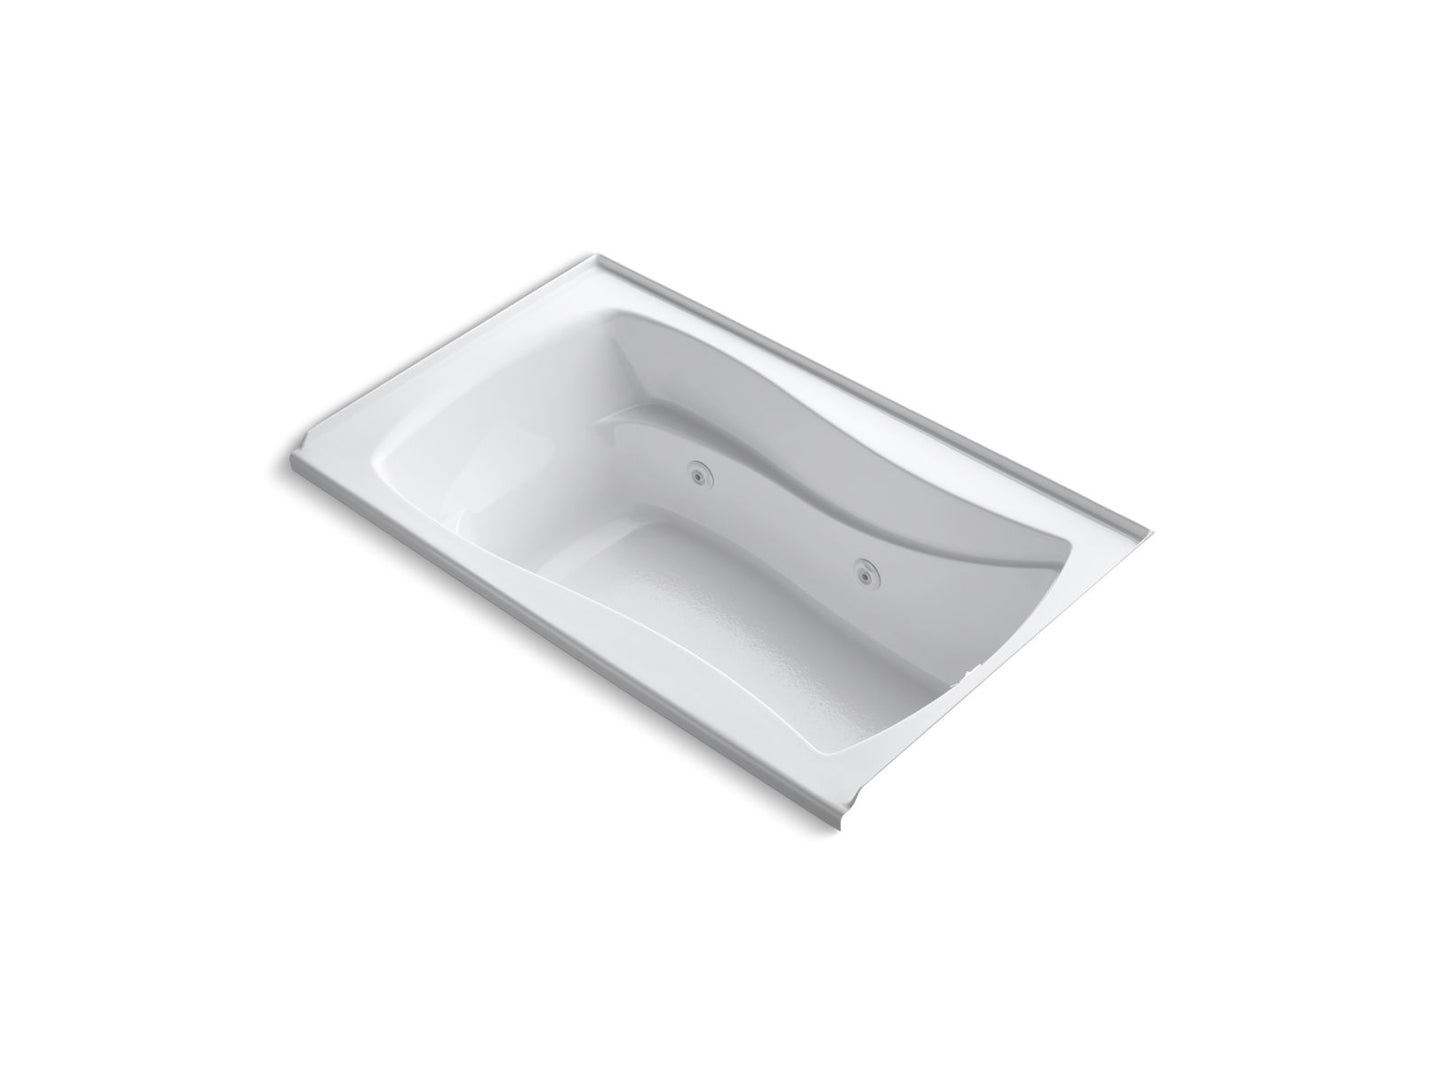 KOHLER K-1239-RW-0 Mariposa 60" X 36" Alcove Whirlpool Bath With Bask Heated Surface, Integral Flange And Right-Hand Drain In White